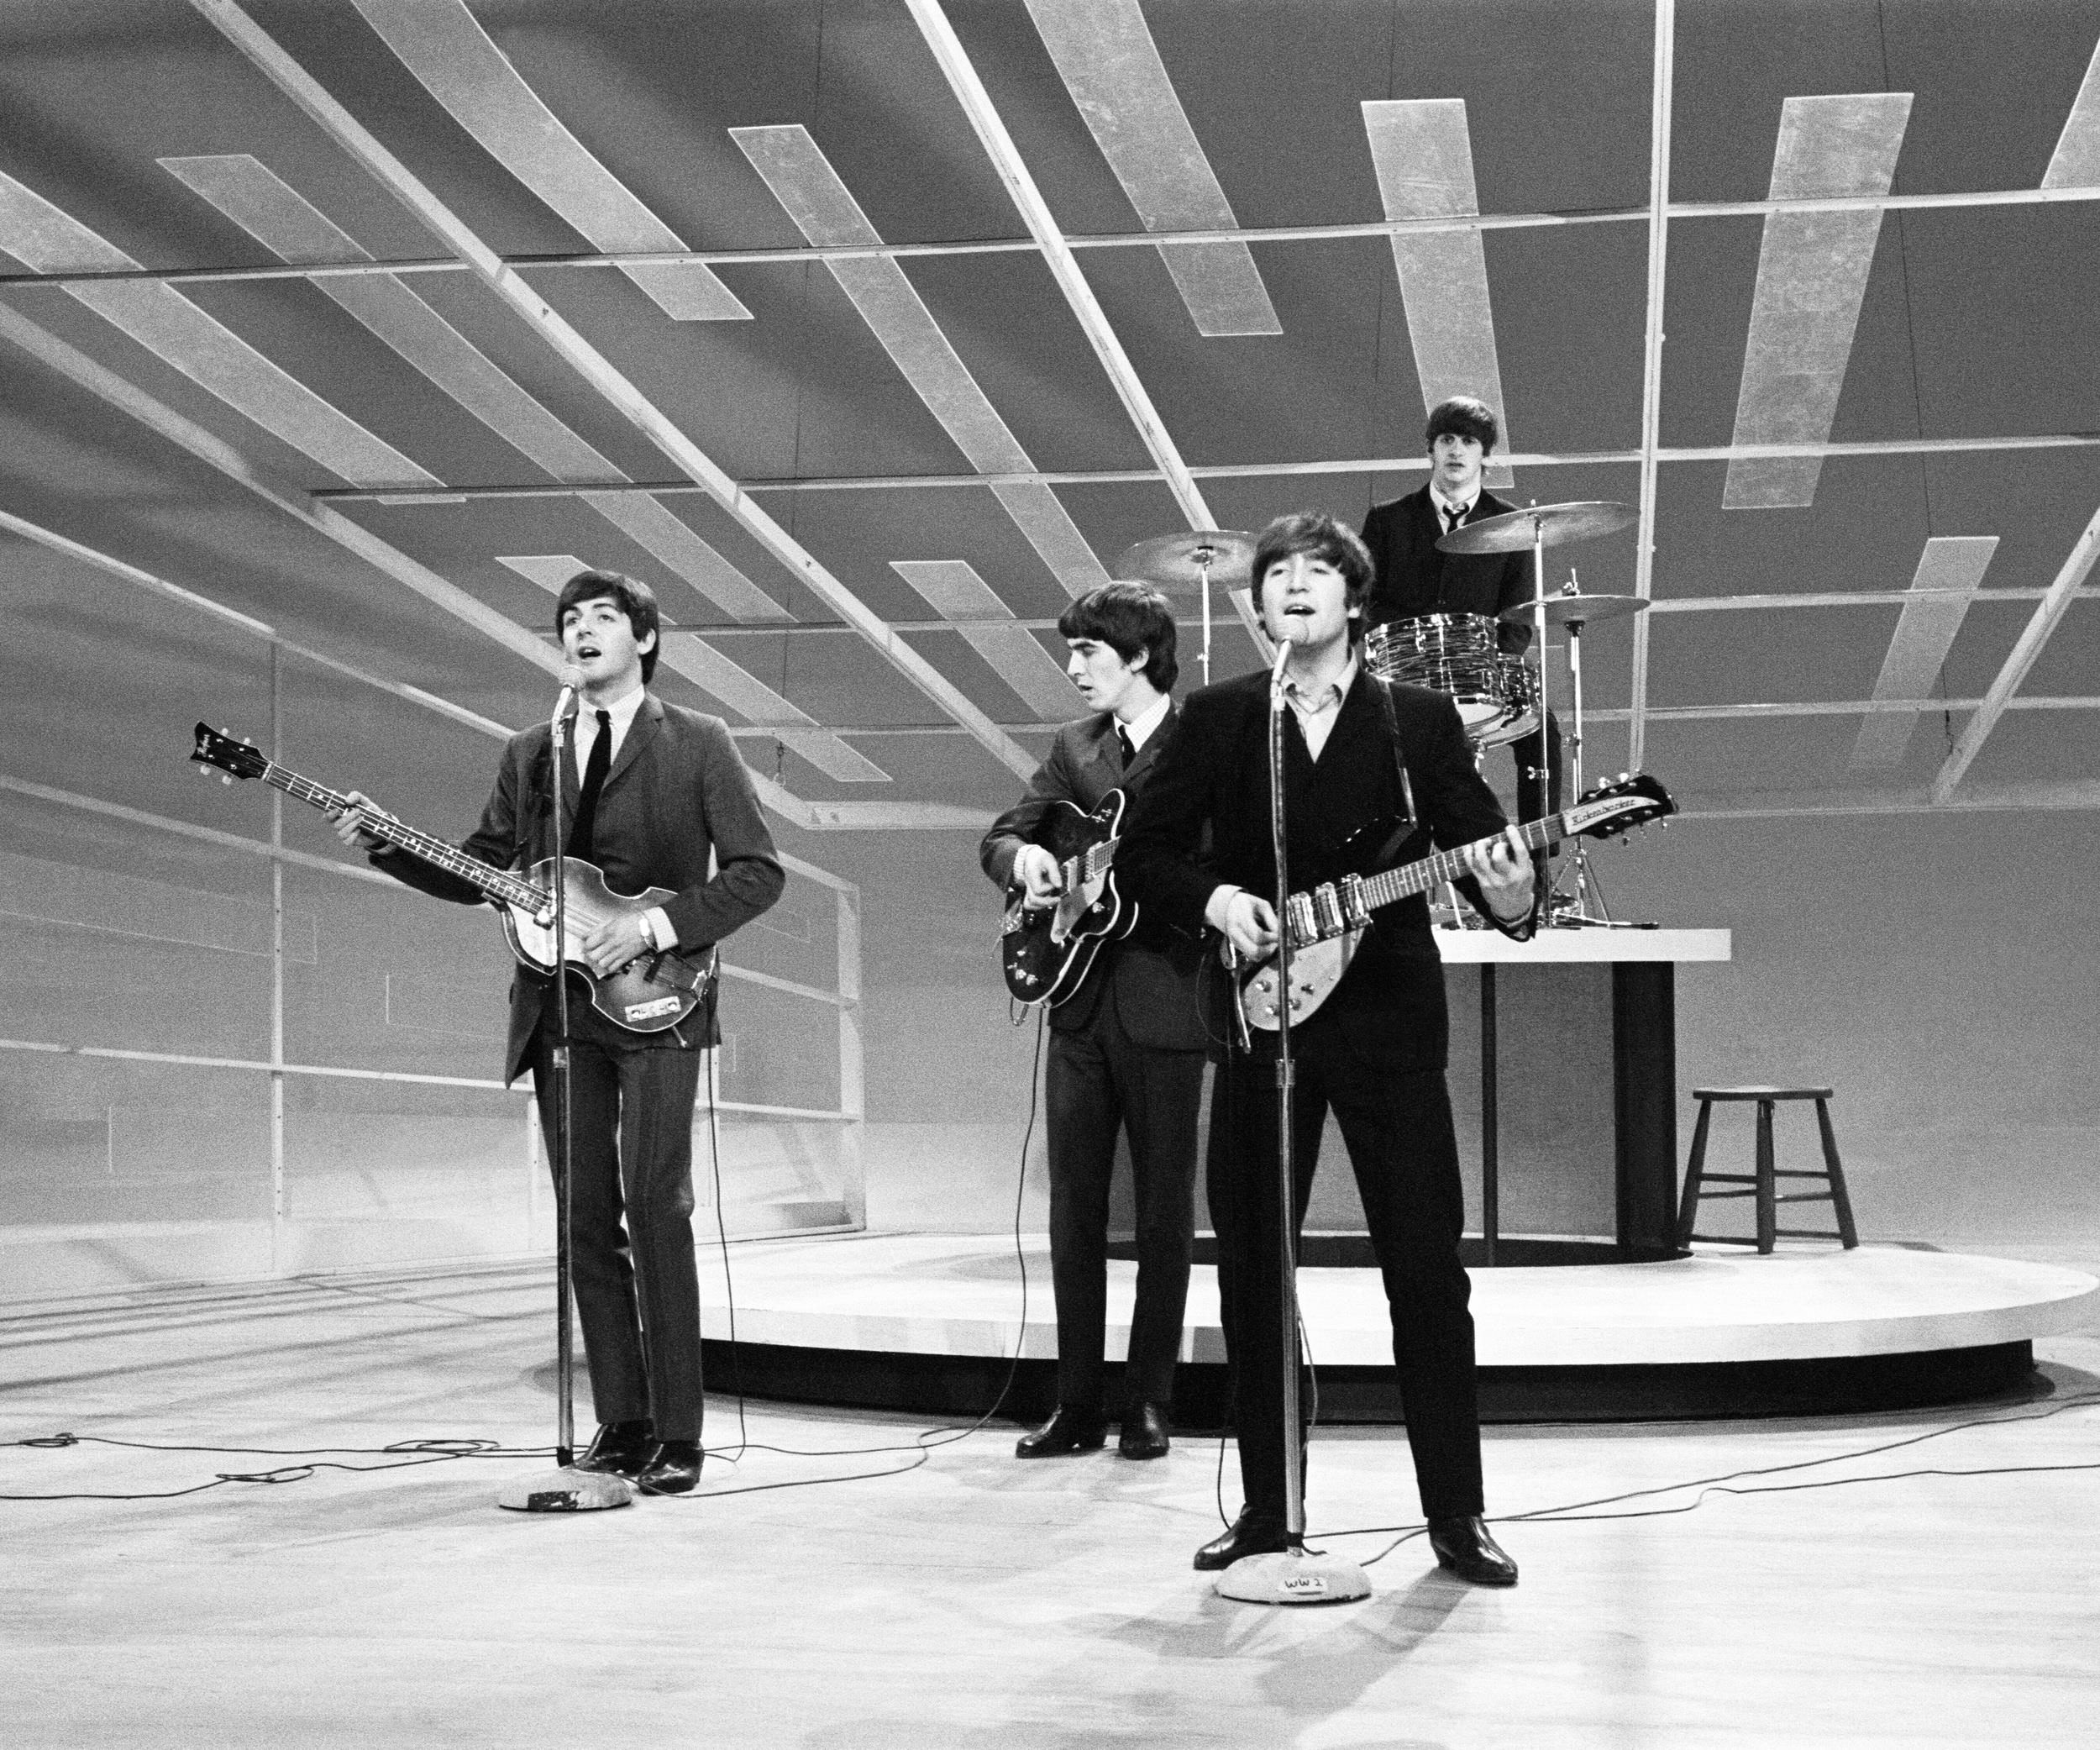 <p>The Beatles’ first No. 1 hit in the U.S. kicked off the British Invasion and galvanized rock 'n' roll at a time when the rebellious art form had lost its edge. The Fab Four changed all that when they concluded their “Ed Sullivan Show” set with this raucous track that features Lennon and McCartney sharing the lead vocals. It remains The Beatles’ top-selling single and is likely the first song that comes to mind when you think of the band.</p><p><a href='https://www.msn.com/en-us/community/channel/vid-cj9pqbr0vn9in2b6ddcd8sfgpfq6x6utp44fssrv6mc2gtybw0us'>Follow us on MSN to see more of our exclusive entertainment content.</a></p>